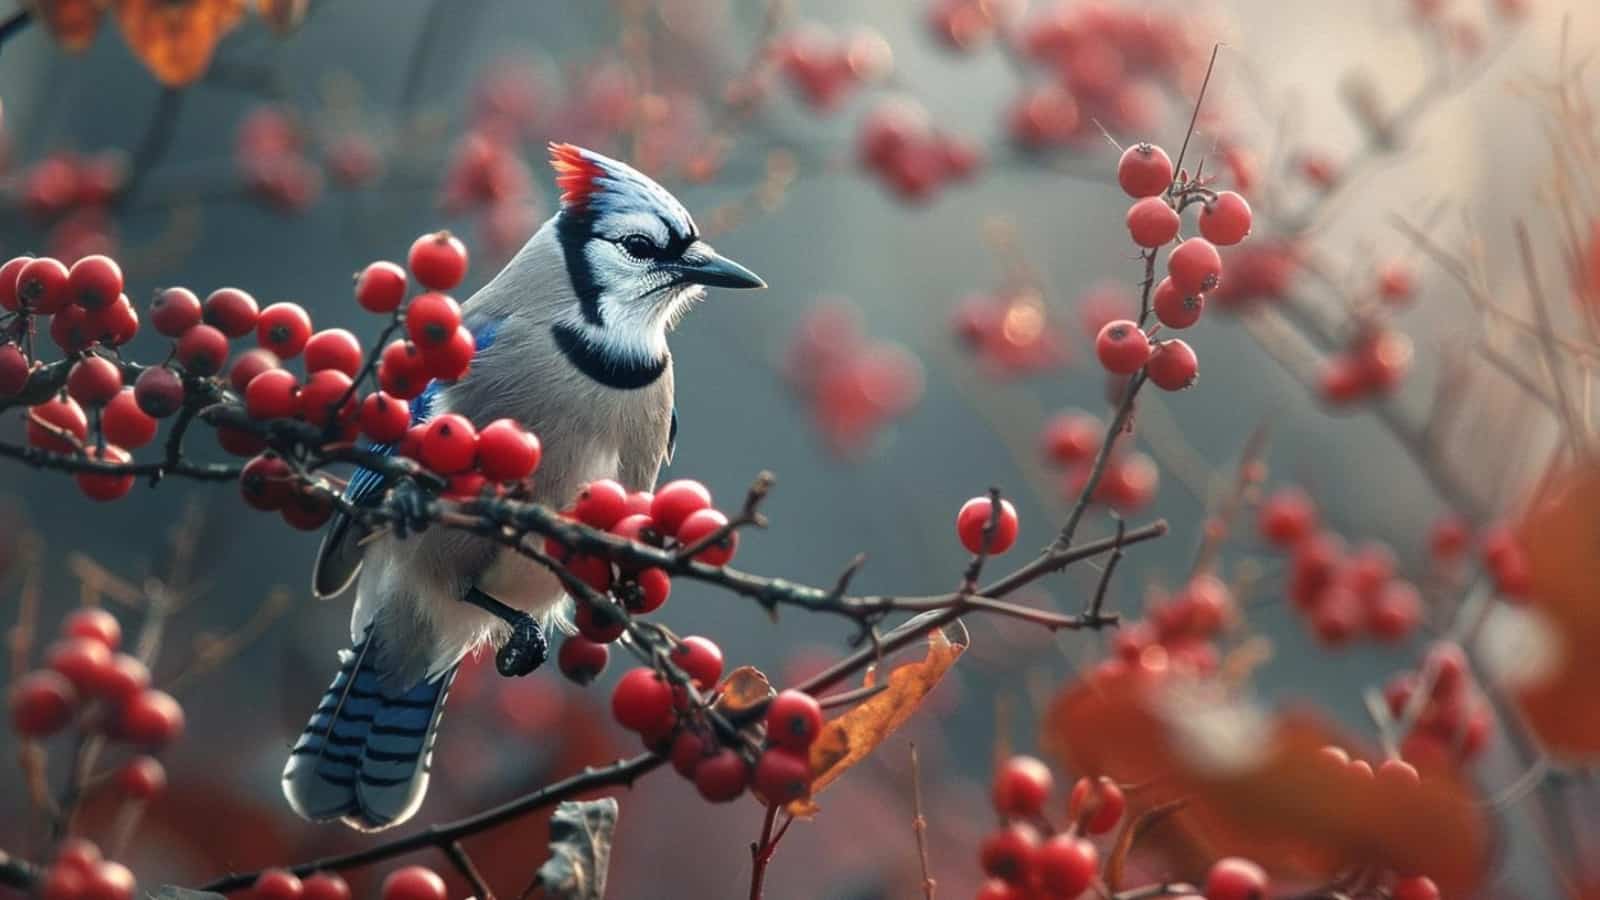 blue jay bird eating red berries on the shrub